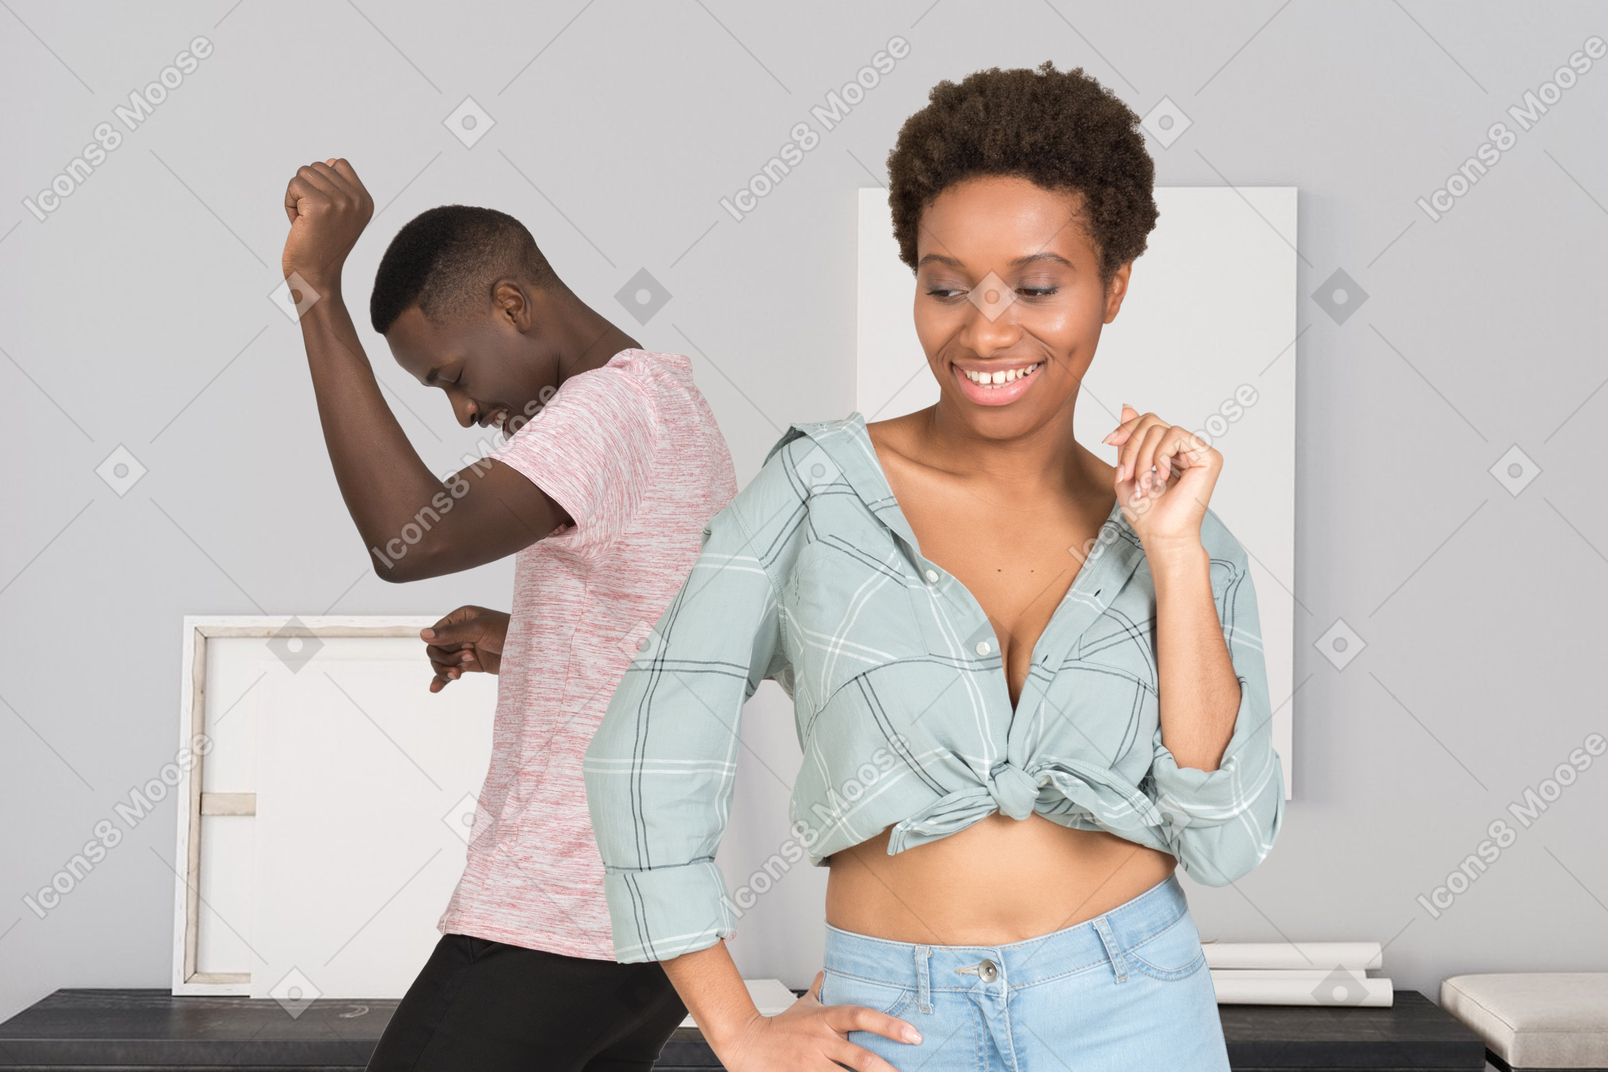 A woman and a man dancing in a room